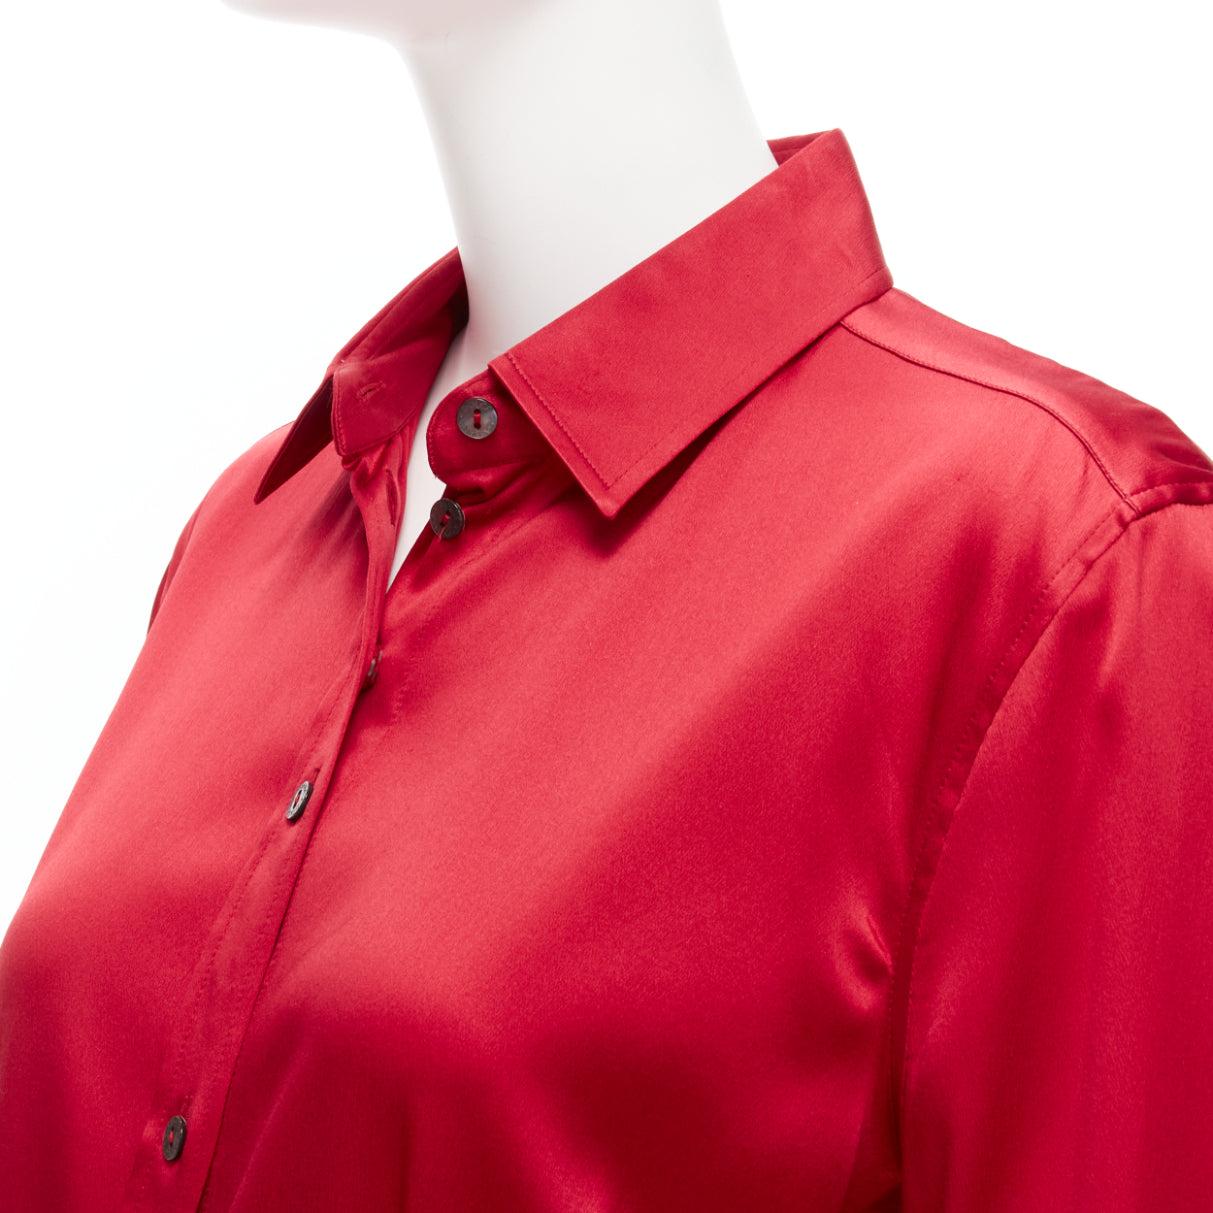 DOLCE GABBANA red silk blend darted double button dress shirt IT46 XL
Reference: GIYG/A00344
Brand: Dolce Gabbana
Designer: Domenico Dolce and Stefano Gabbana
Material: Silk, Blend
Color: Red
Pattern: Solid
Closure: Button
Extra Details: Double set